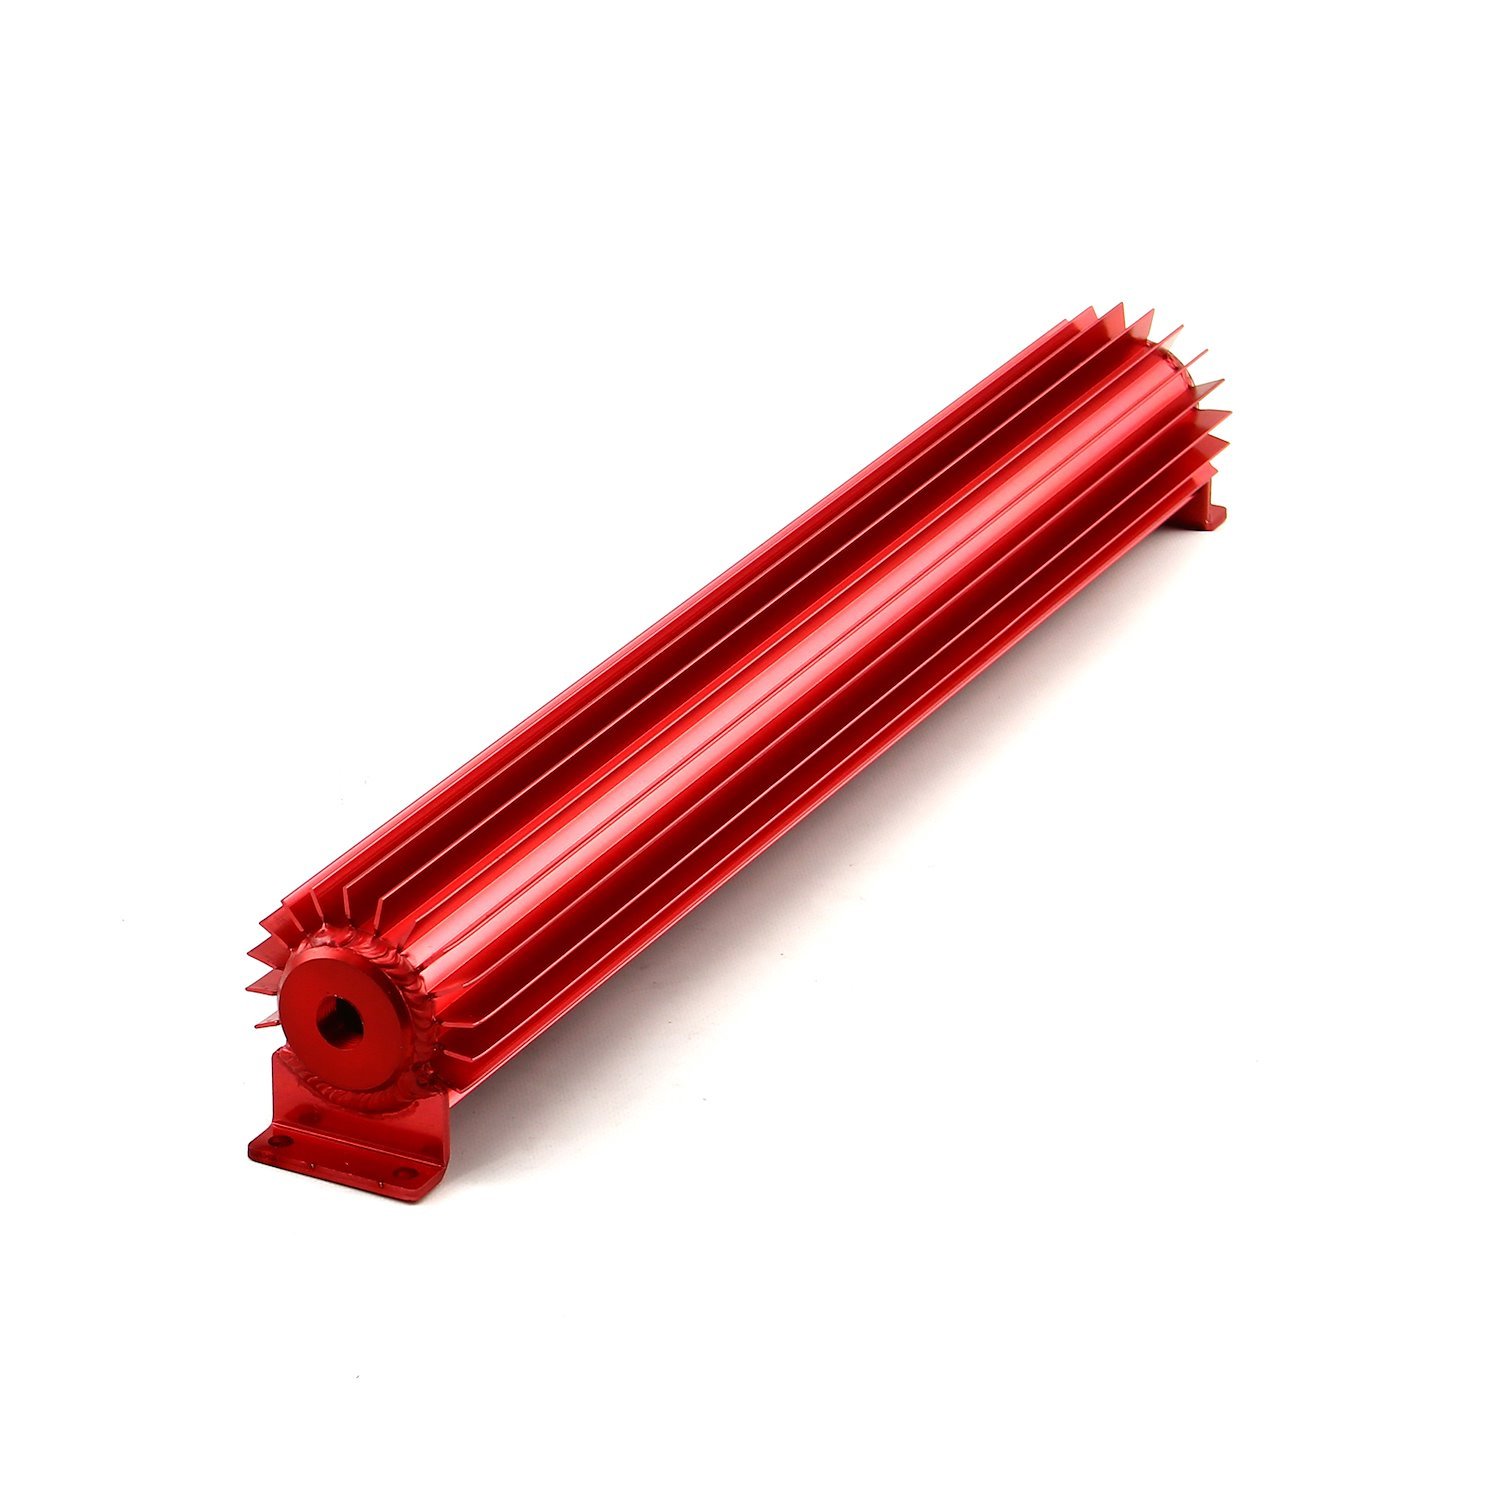 Single Pass Transmission Oil Cooler With 3/8" Hose Barb Fittings Overall: 3" H x 3.25" T x 20" W